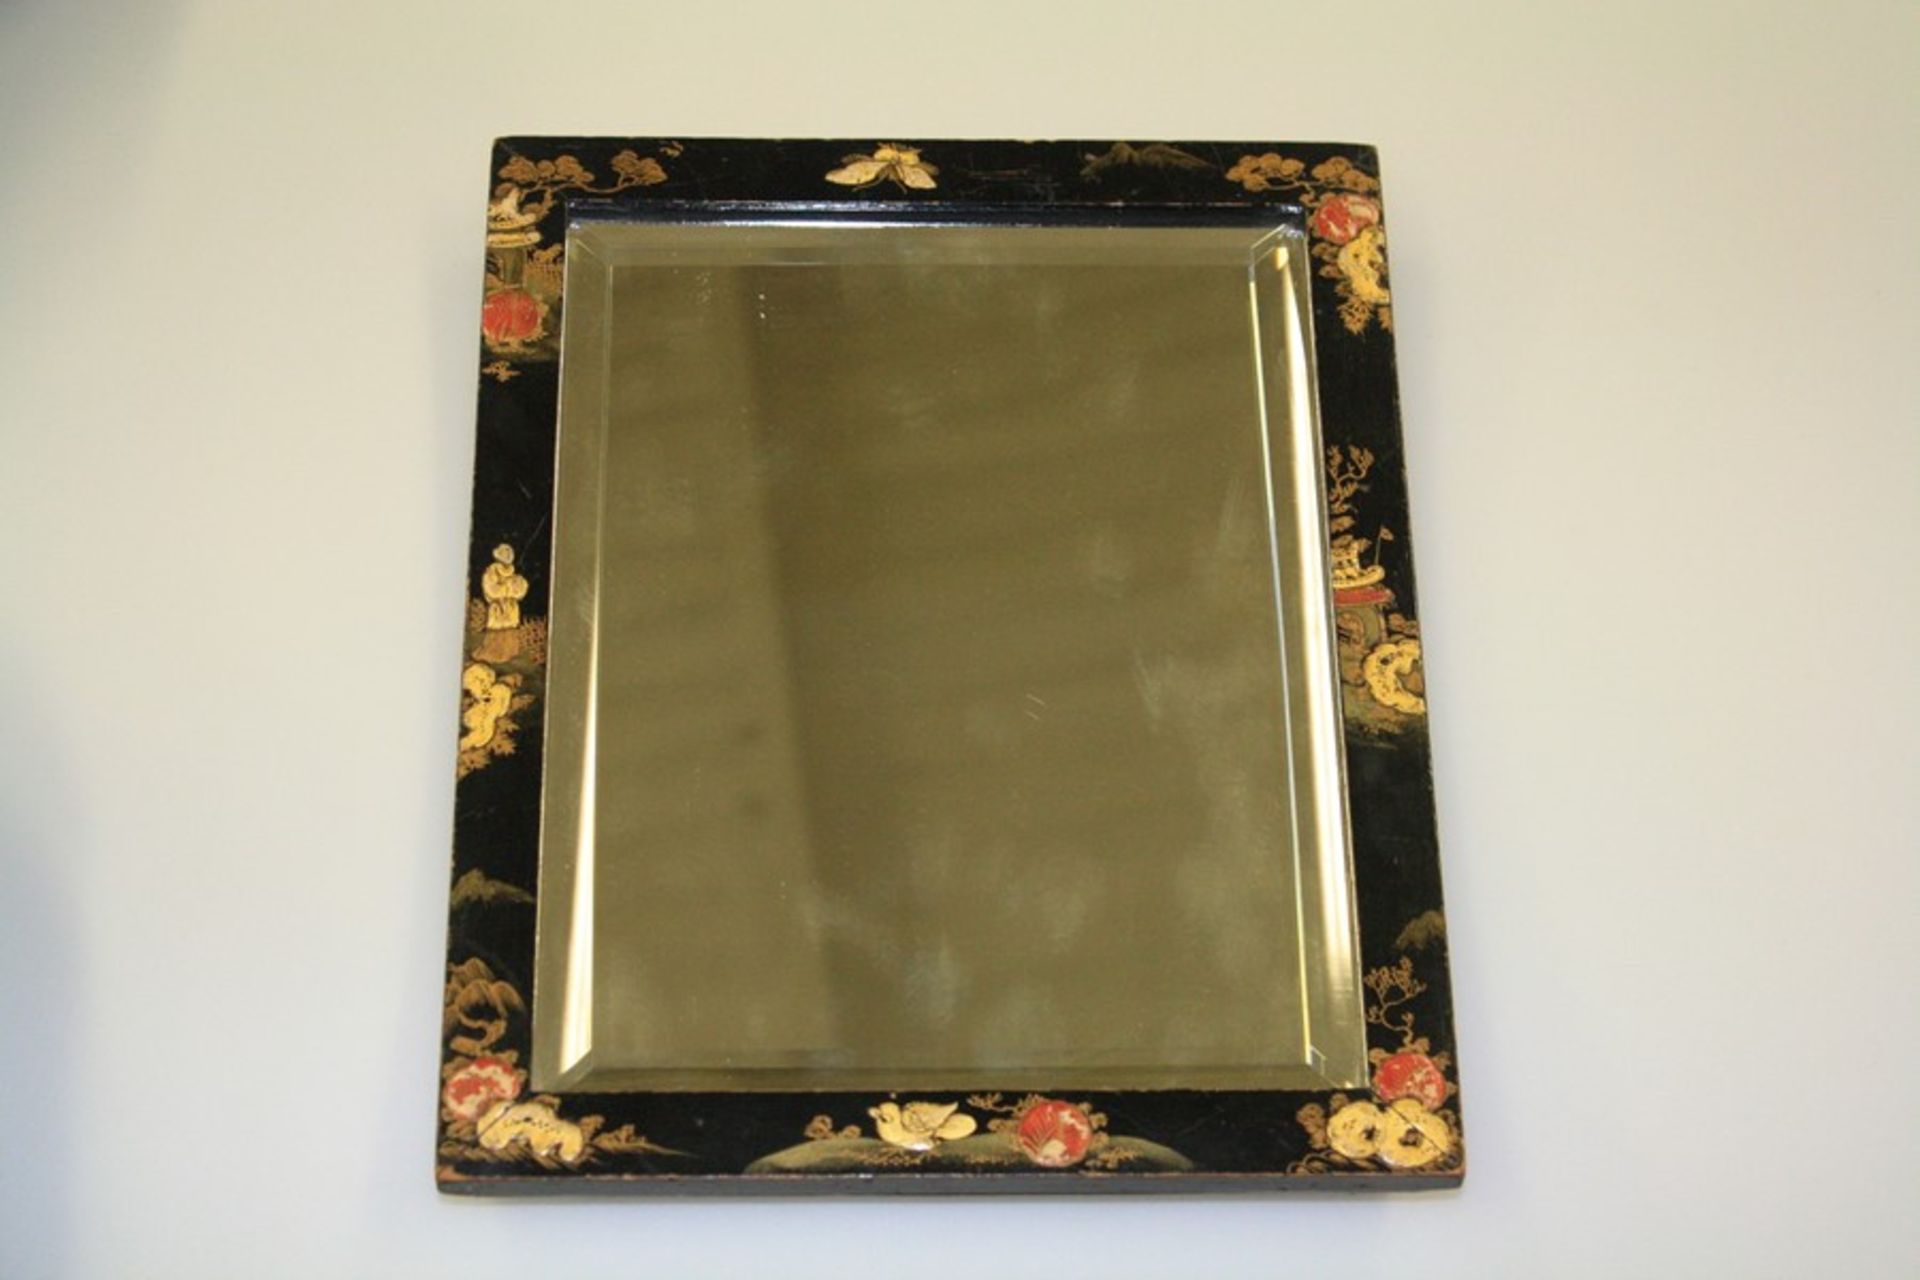 A 1920'S CHINOISERIE LACQUER MIRROR